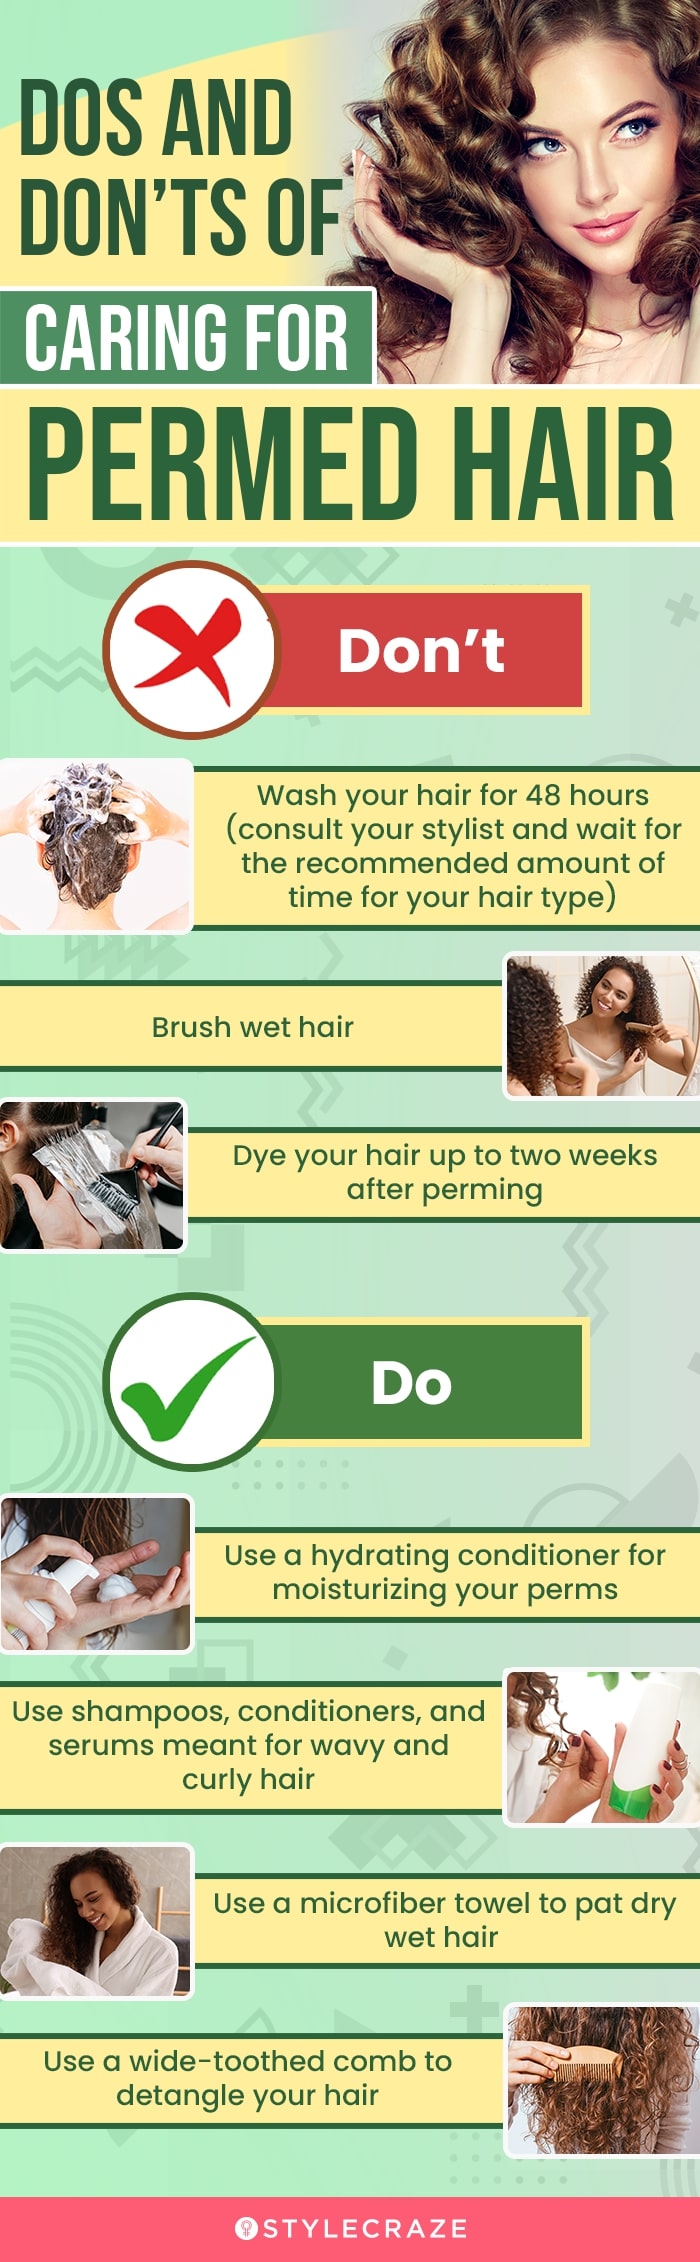 dos and don’ts of caring for permed hair (infographic)